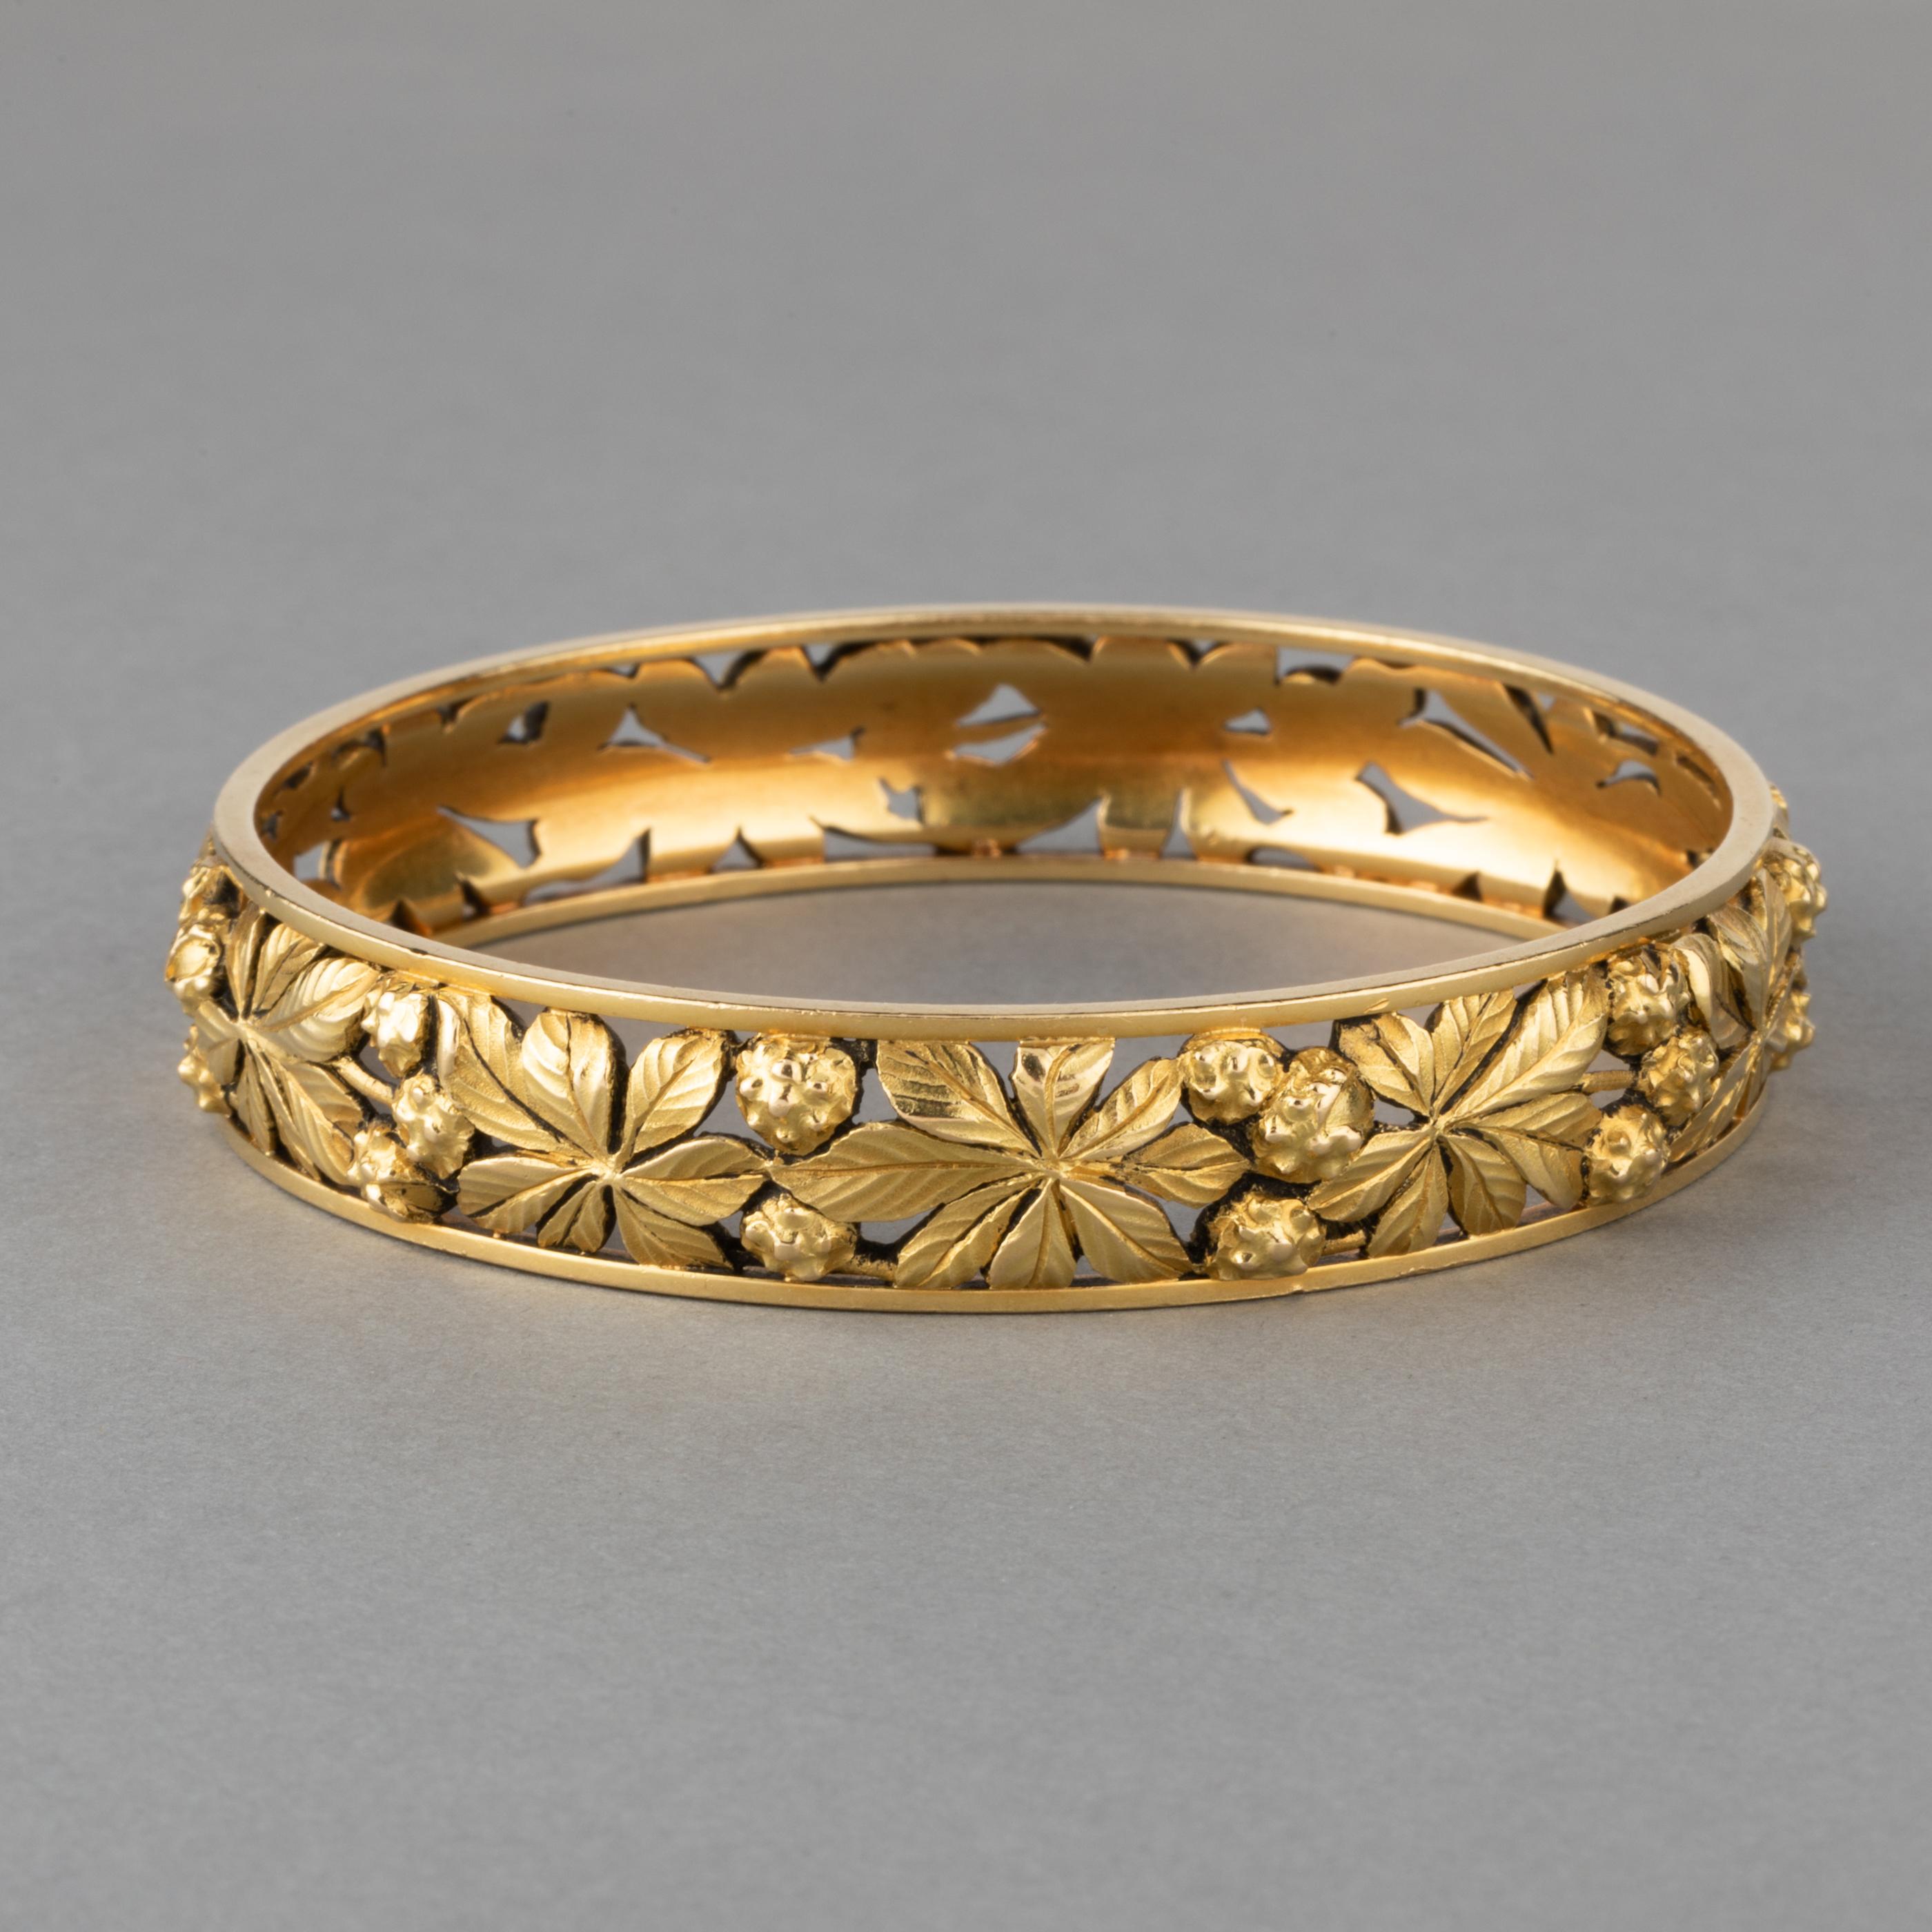 A very lovely bracelet, made in France circa 1880/1900, end of 19th century, begining of Art Nouveau Era.

It is made in yellow gold 18k, it is heavy and weights 52.30 grams.

The diameter is 6.7 cm, the turn is 18.5 cm. The width is 12mm. French